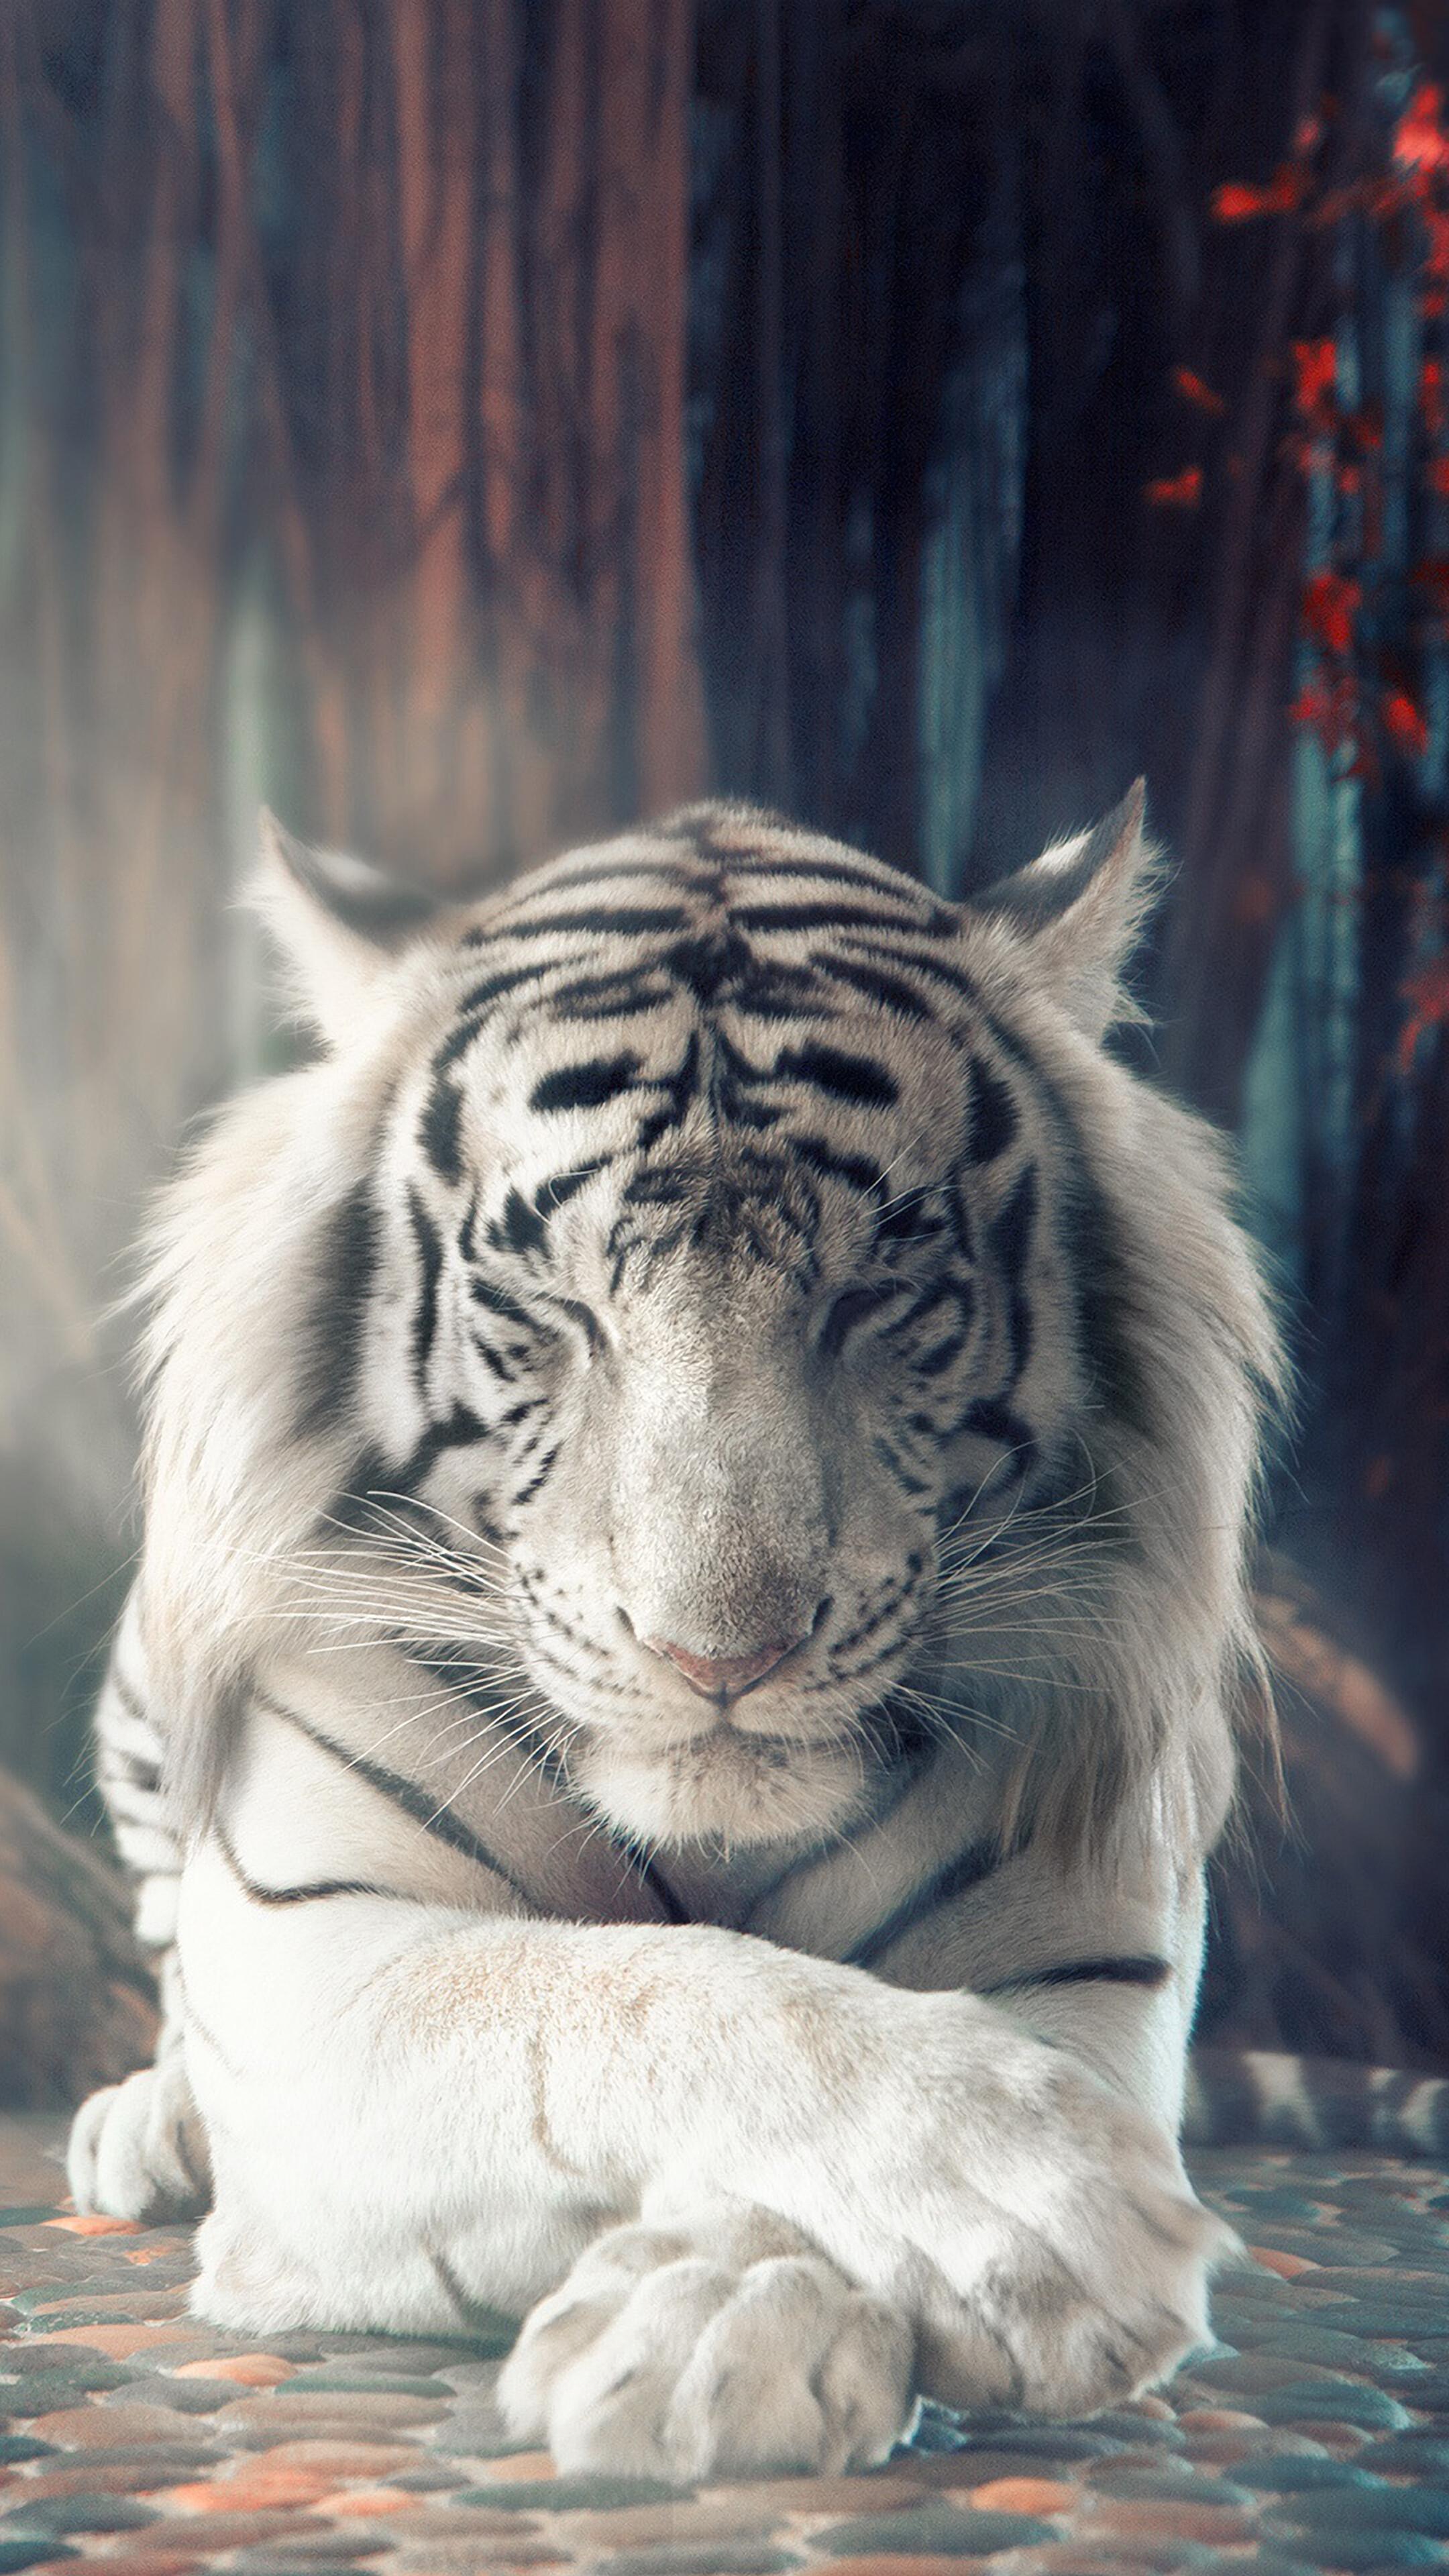 328181 White Tiger Sleeping 4k   Rare Gallery HD Wallpapers